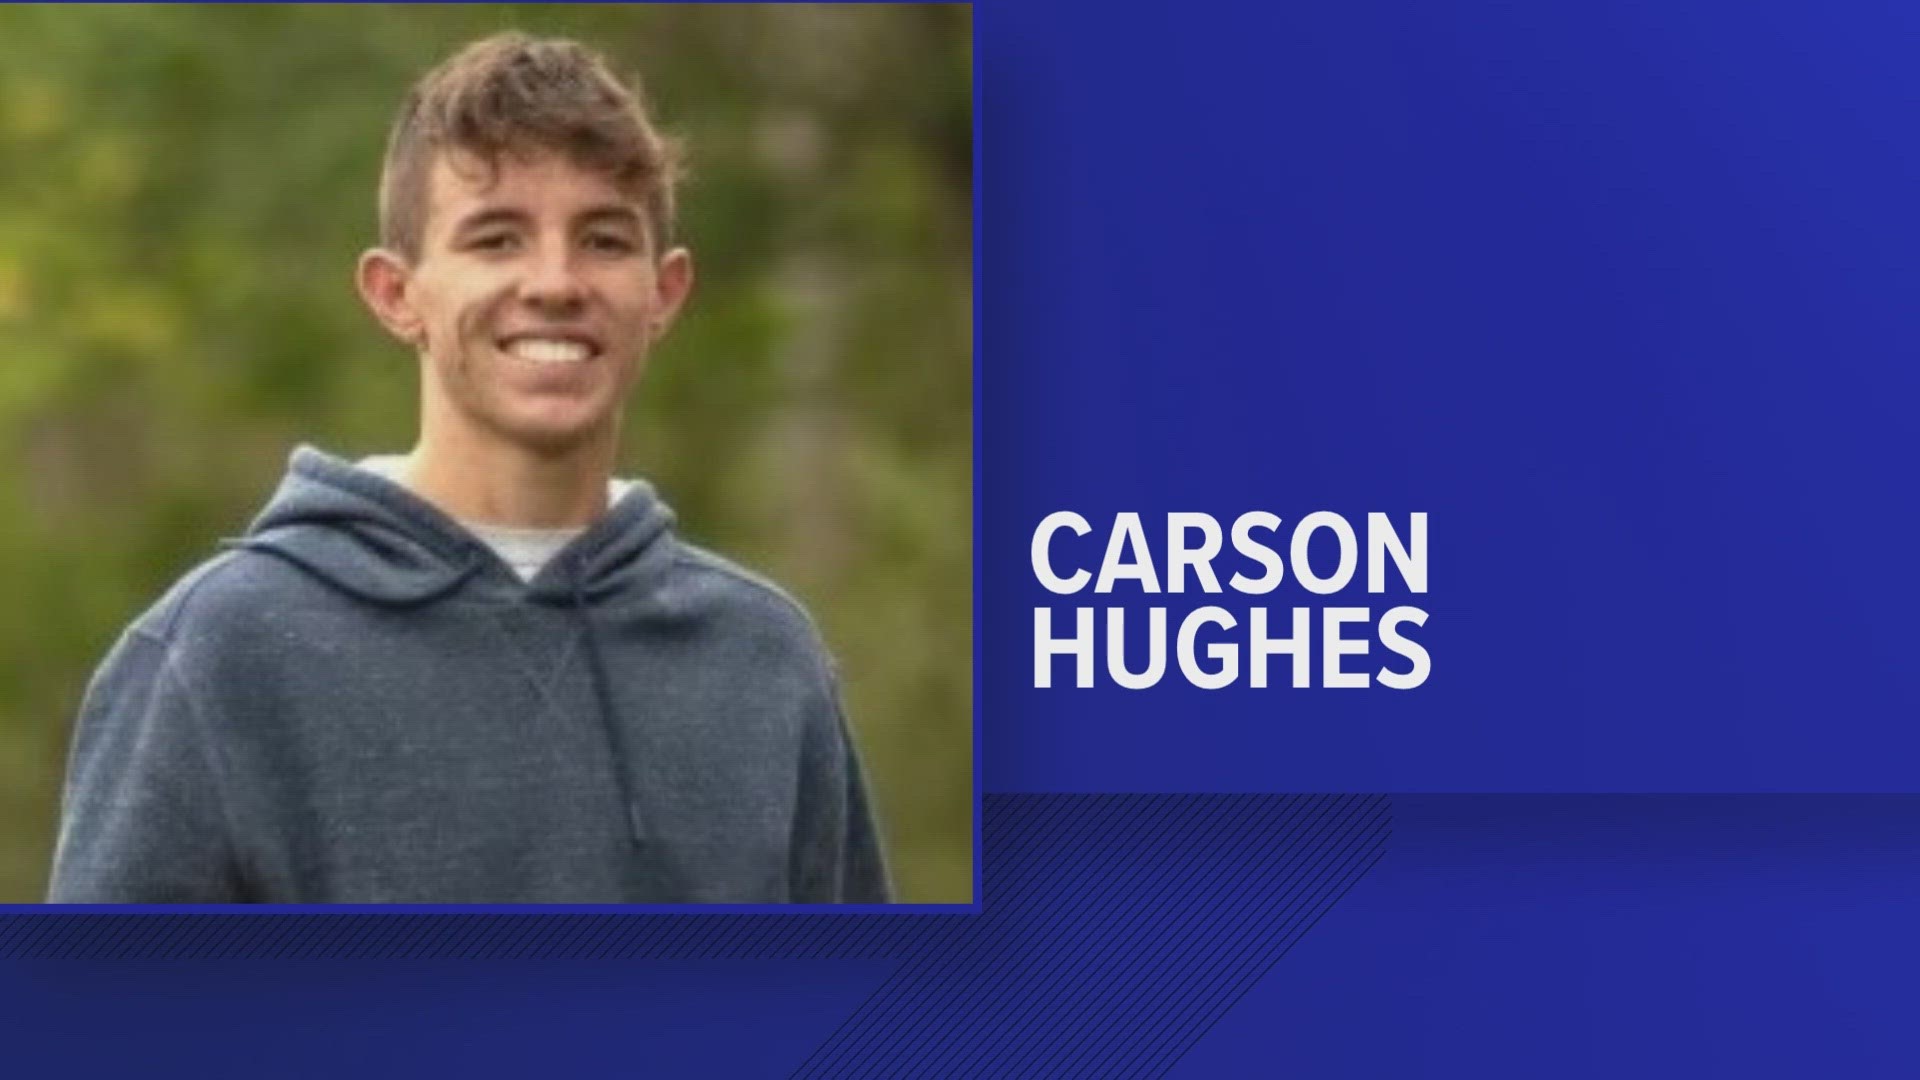 Carson Hughes, a student at Jac-Cen-Del High School in Ripley County, had last been seen Friday afternoon in Versailles State Park.